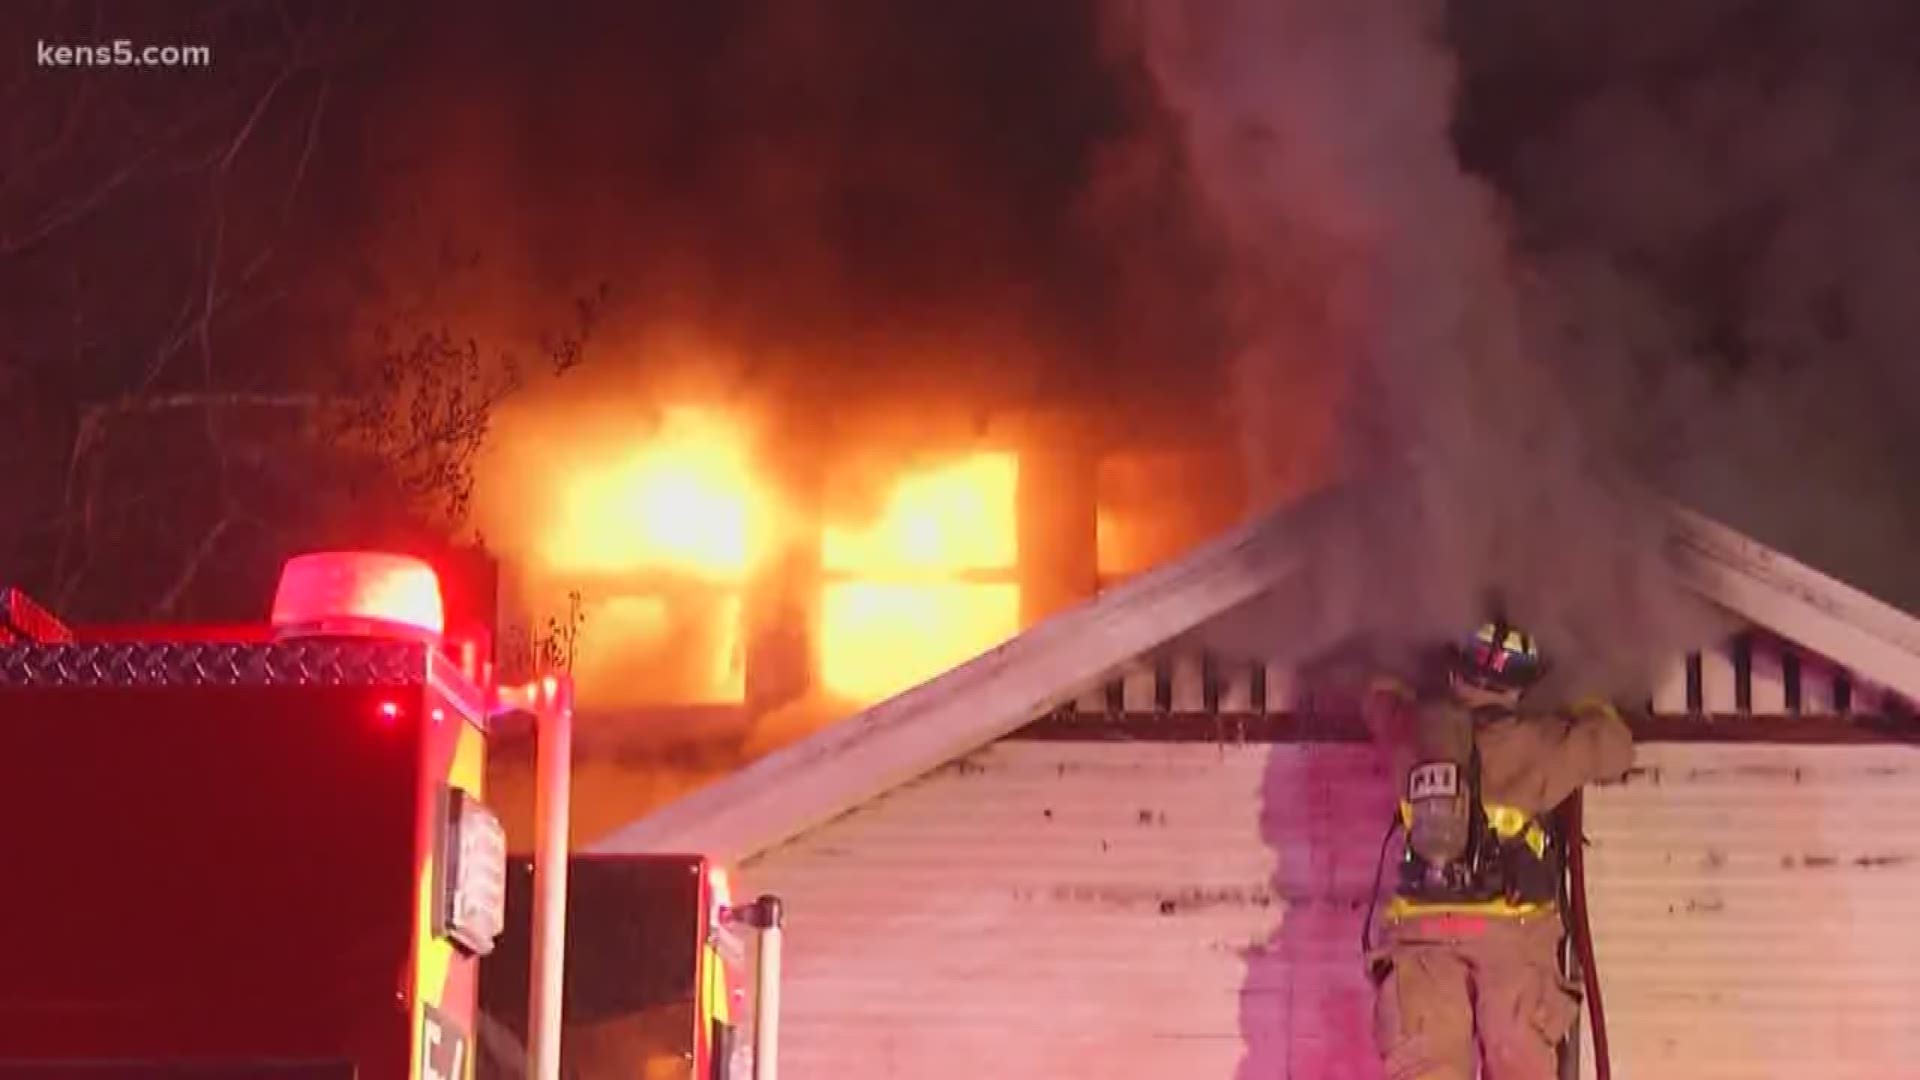 Firefighters battling an early morning house fire are forced to pull out and fight it from the outside. The fire started at a home north of downtown in San Antonio.